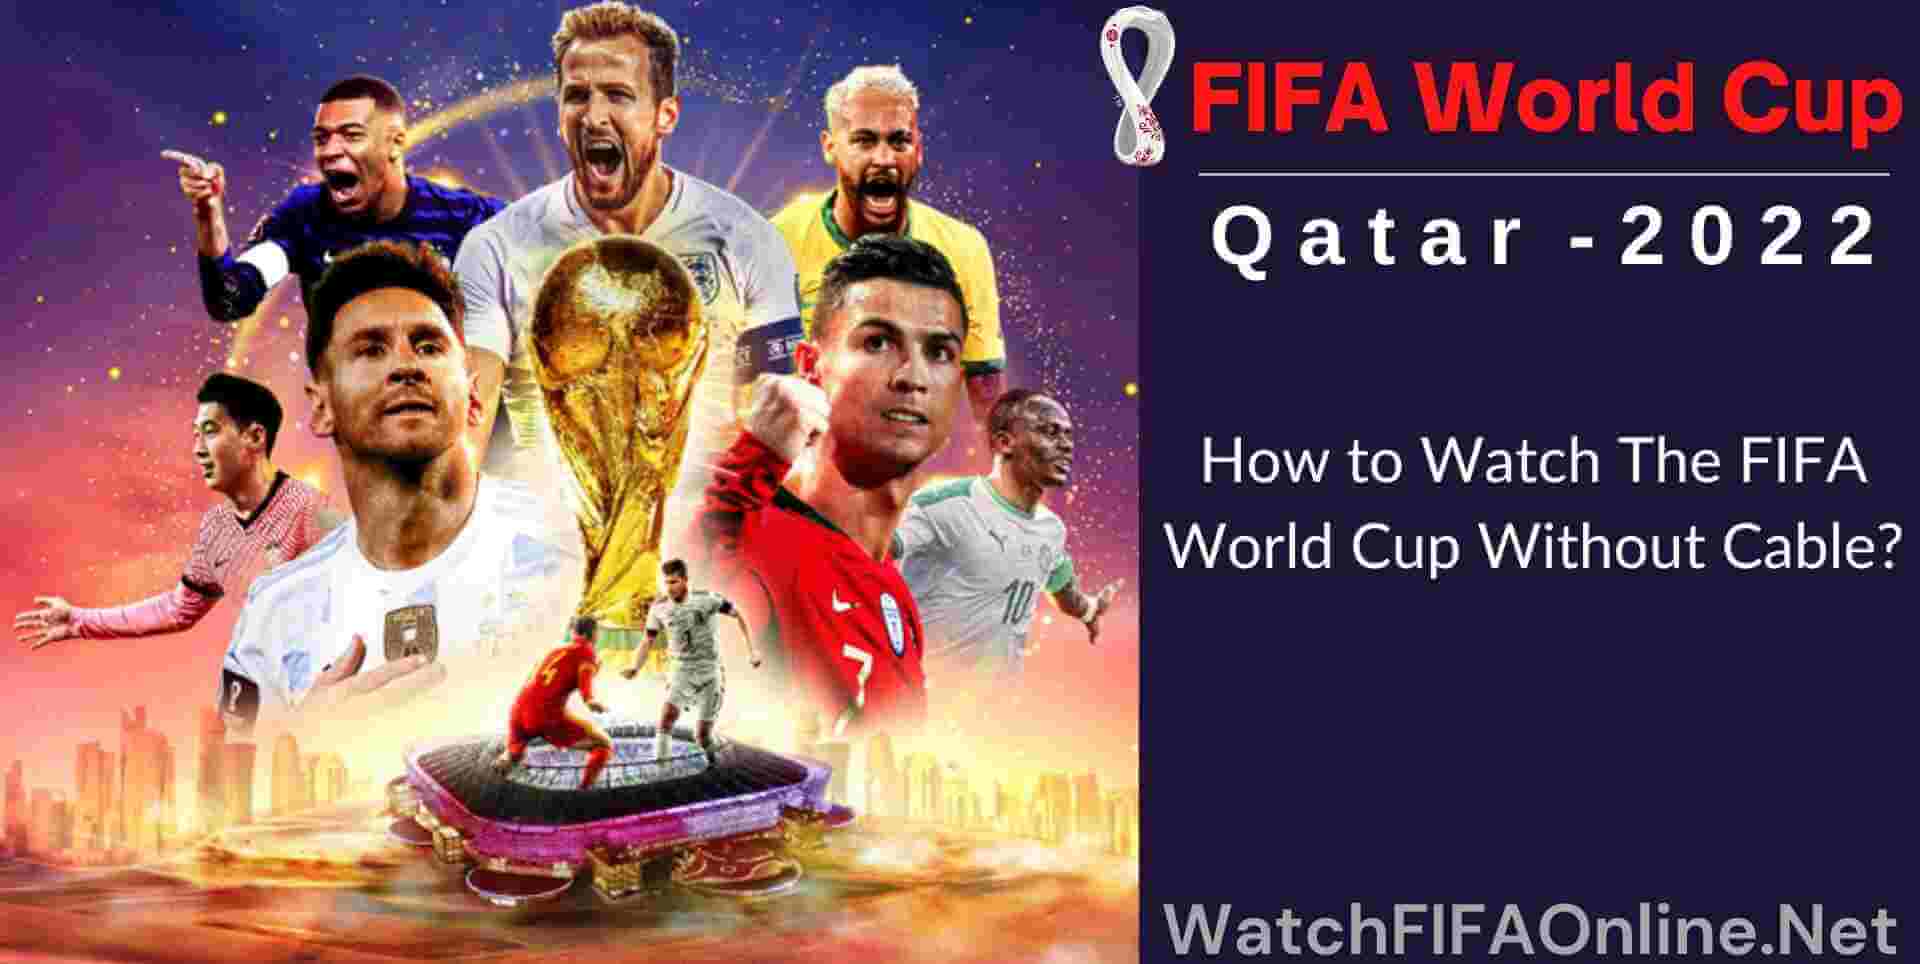 Watch The FIFA World Cup Without Cable